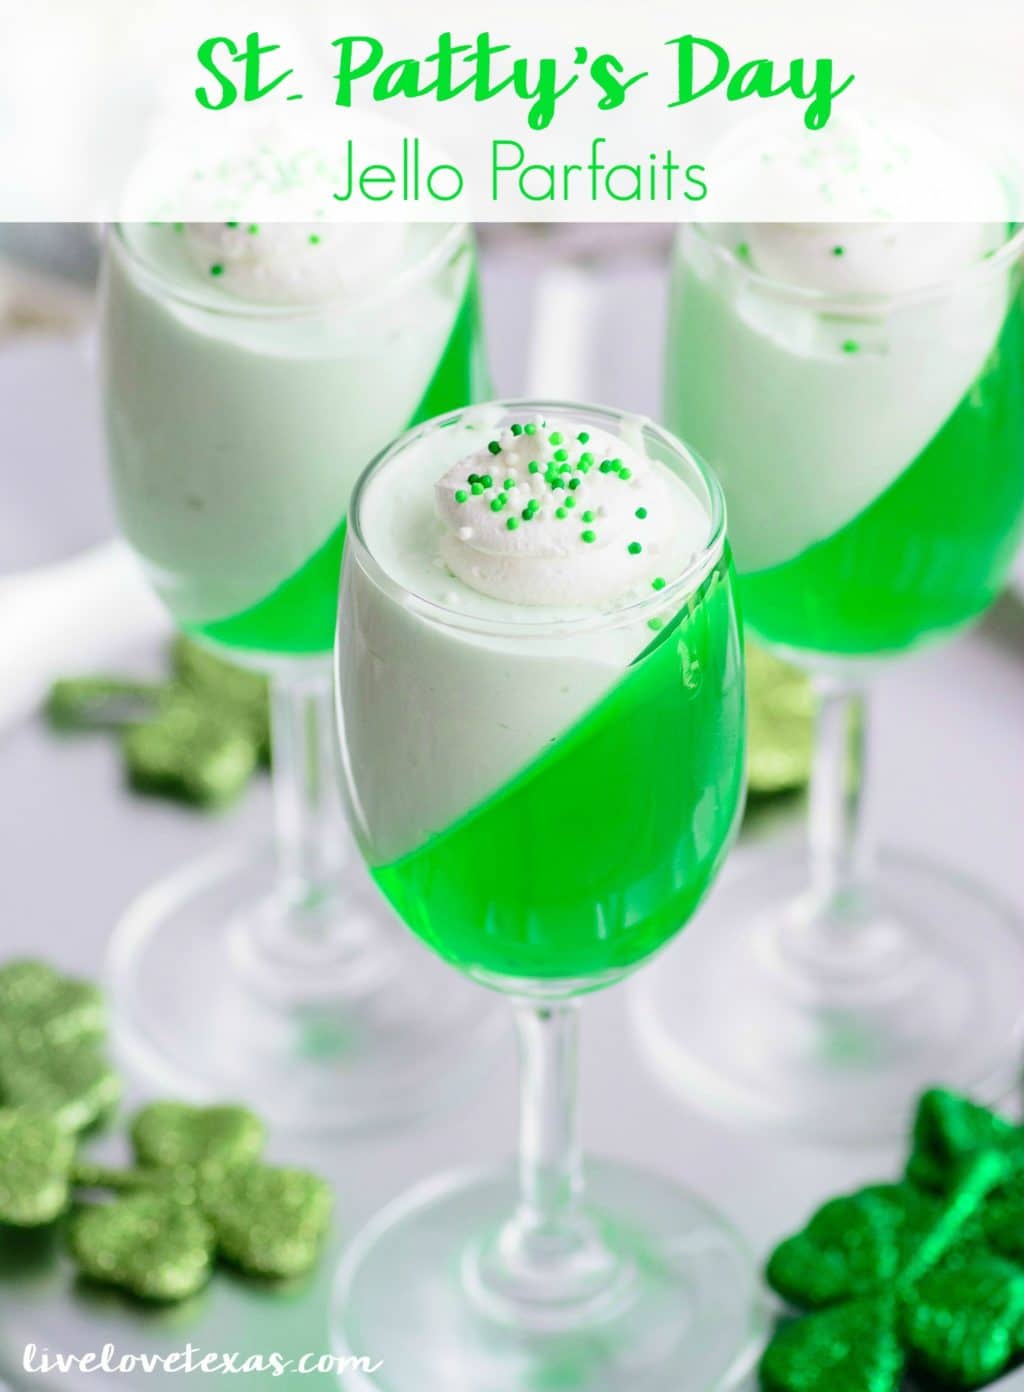 St. Patty's Day Jello Parfaits Recipe. This festive dessert recipe only has two ingredients and is so easy to make! 